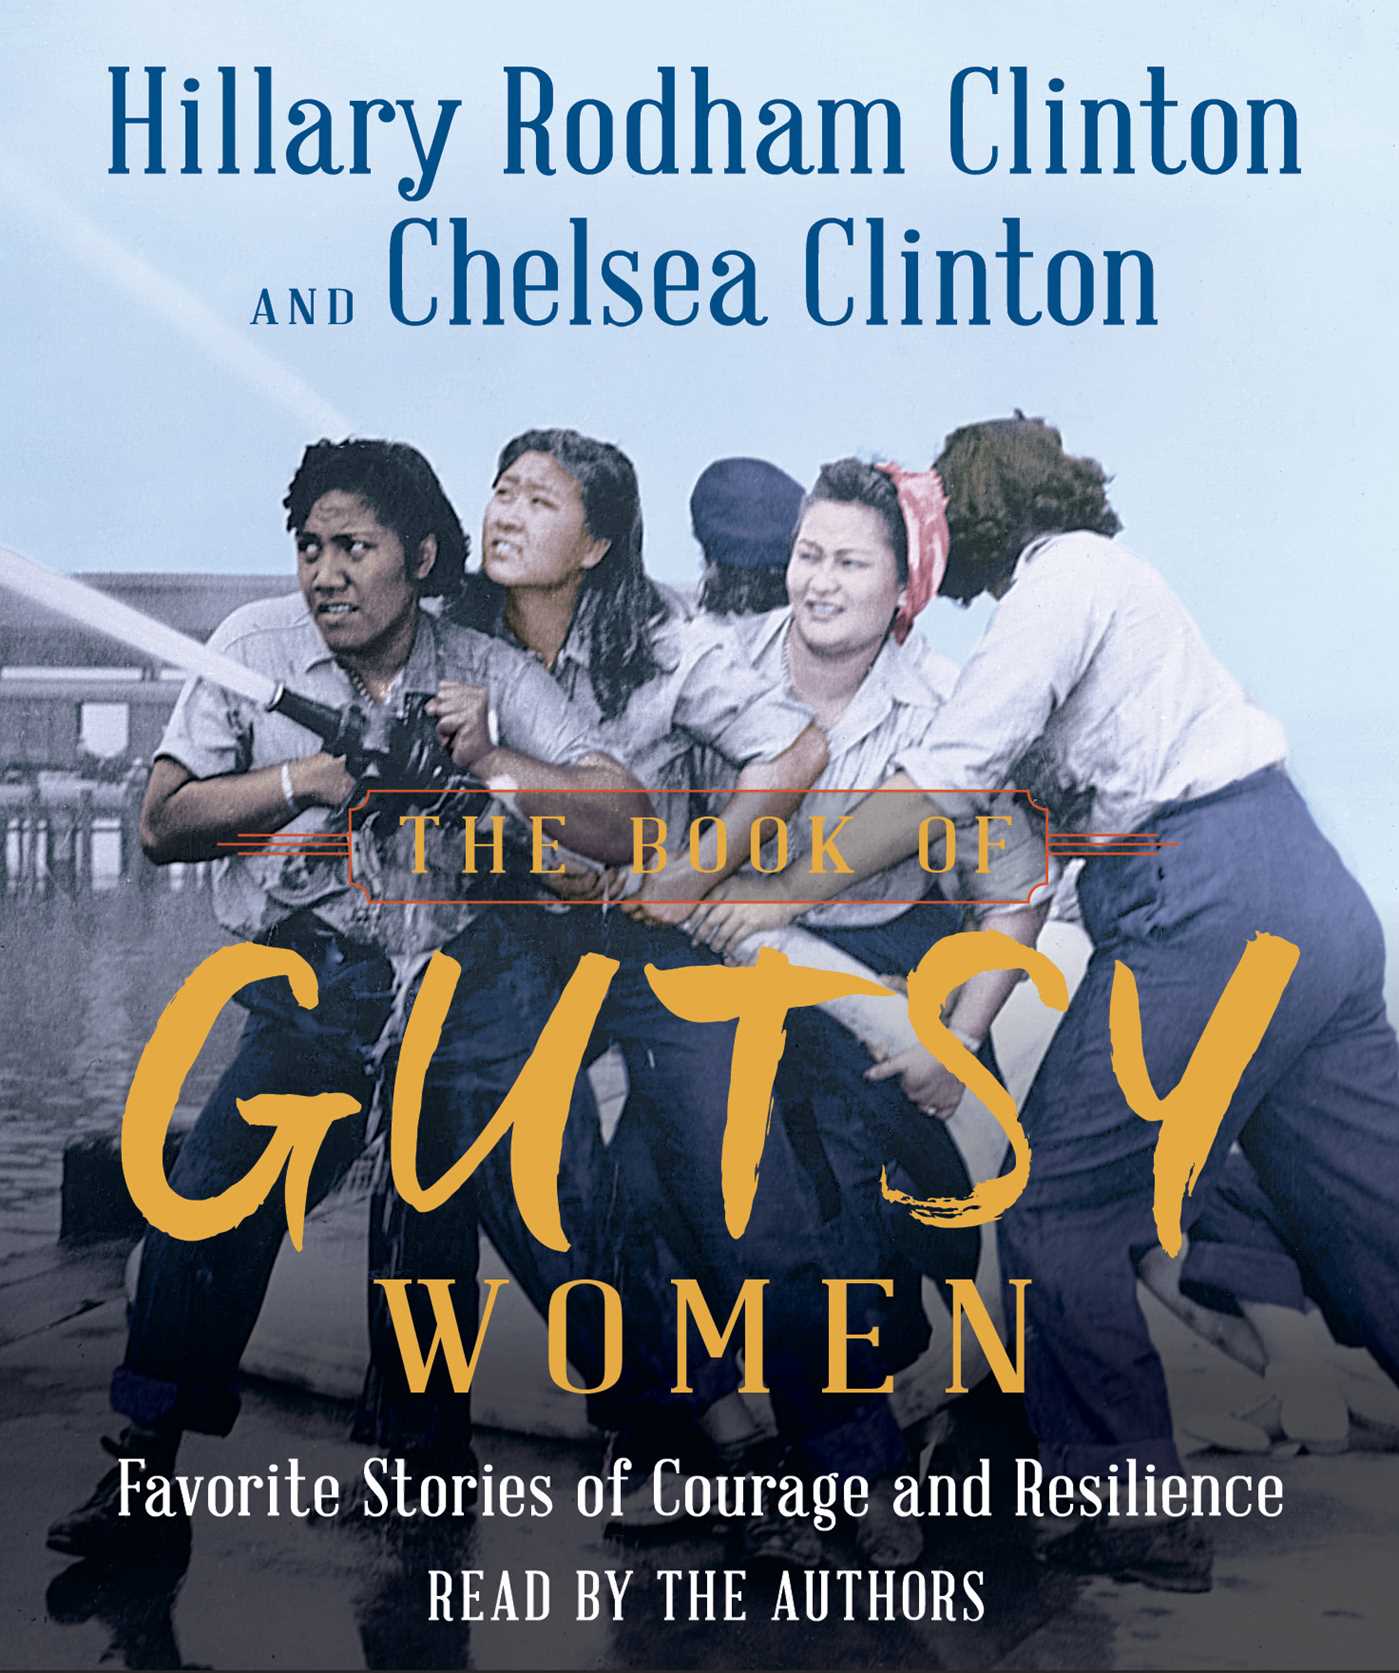 Image for "The Book of Gutsy Women"